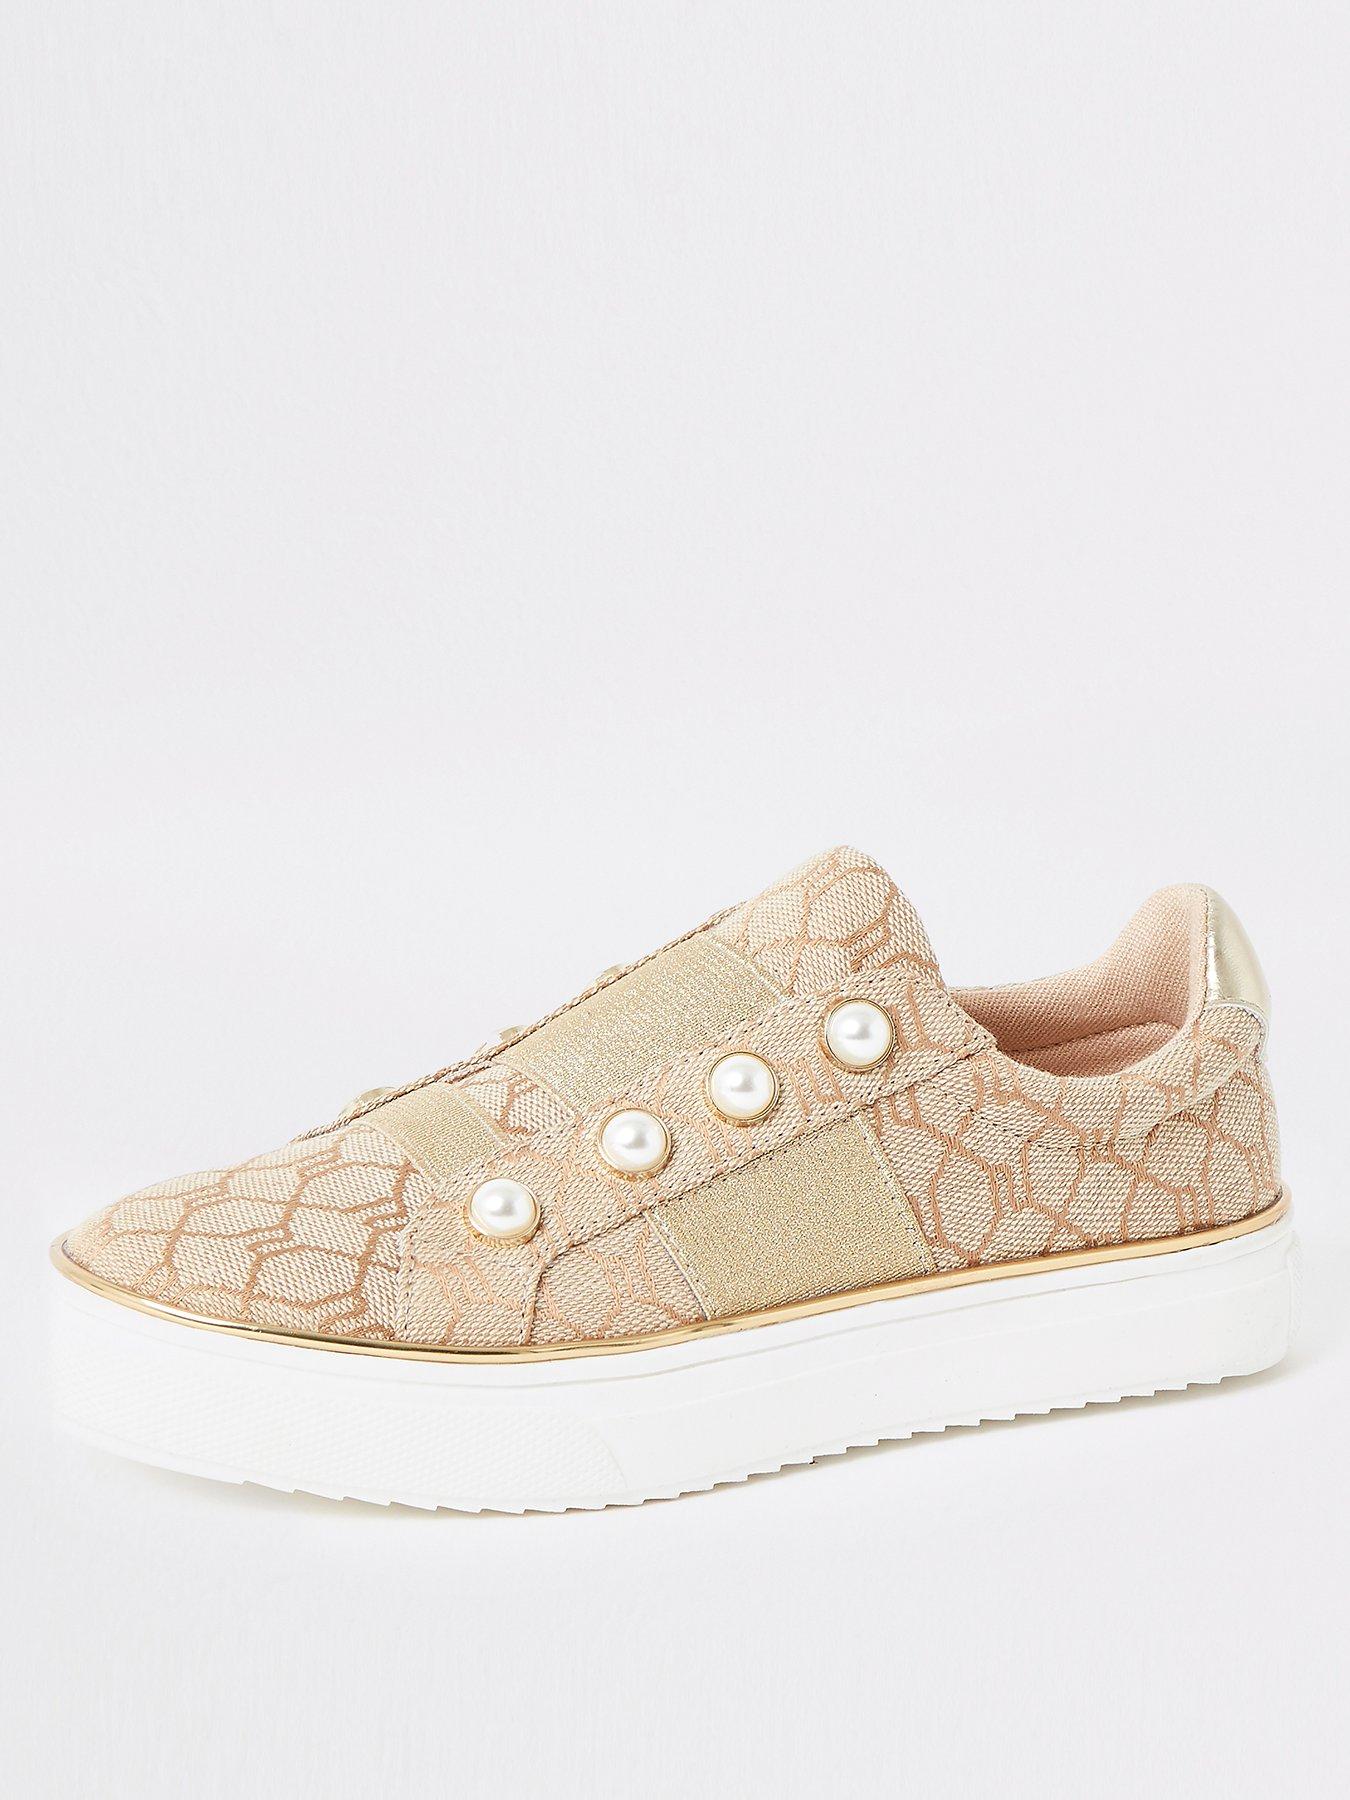 very river island trainers